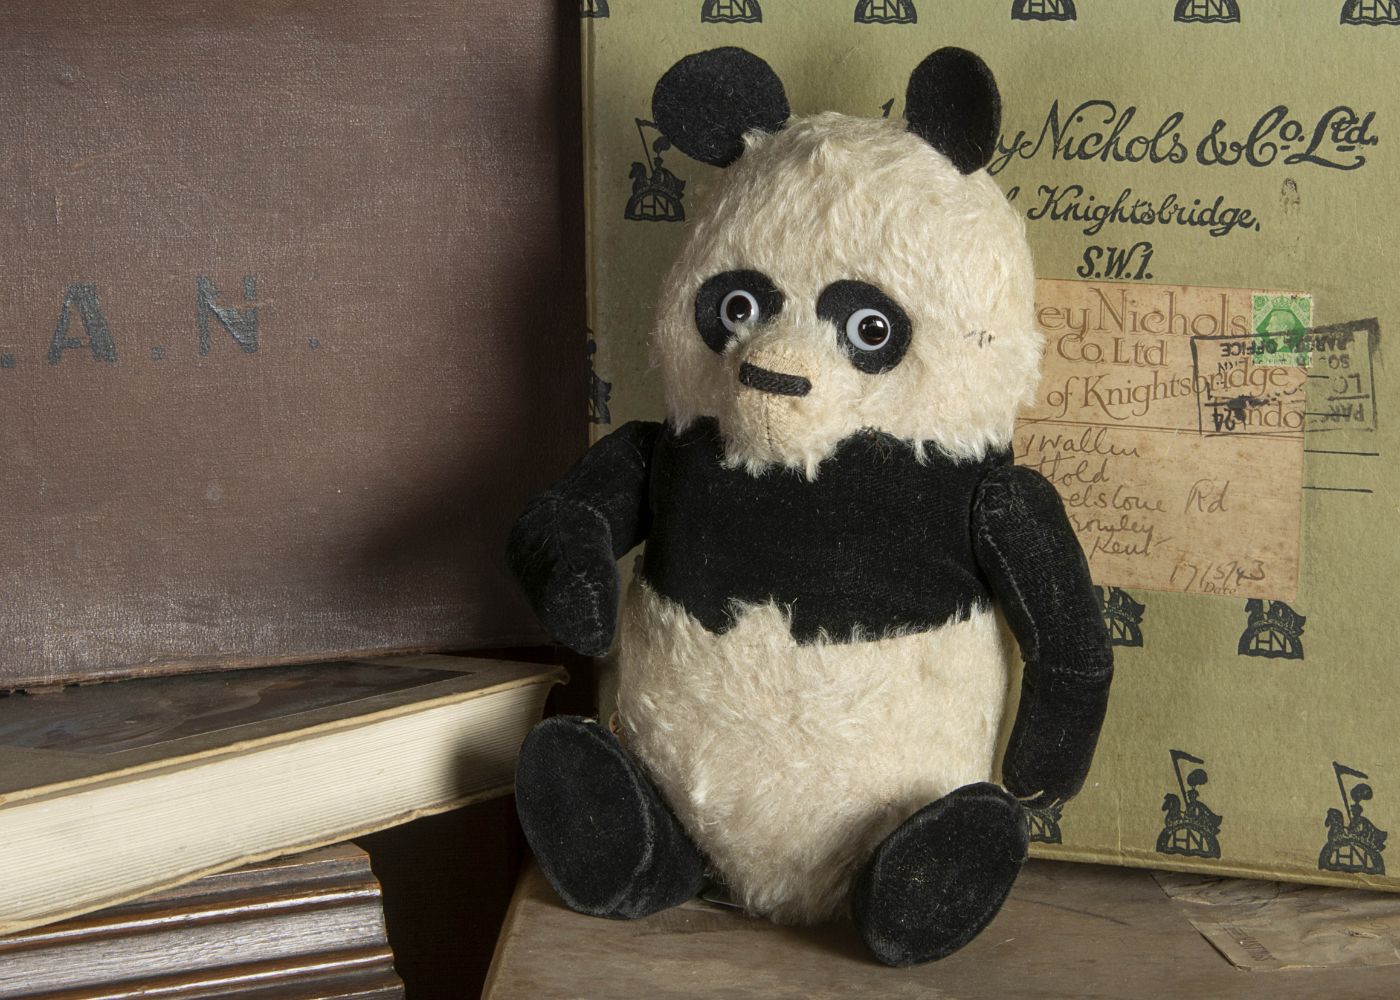 The Susan Collard Collection - Antique and Vintage Teddy Bear Auction